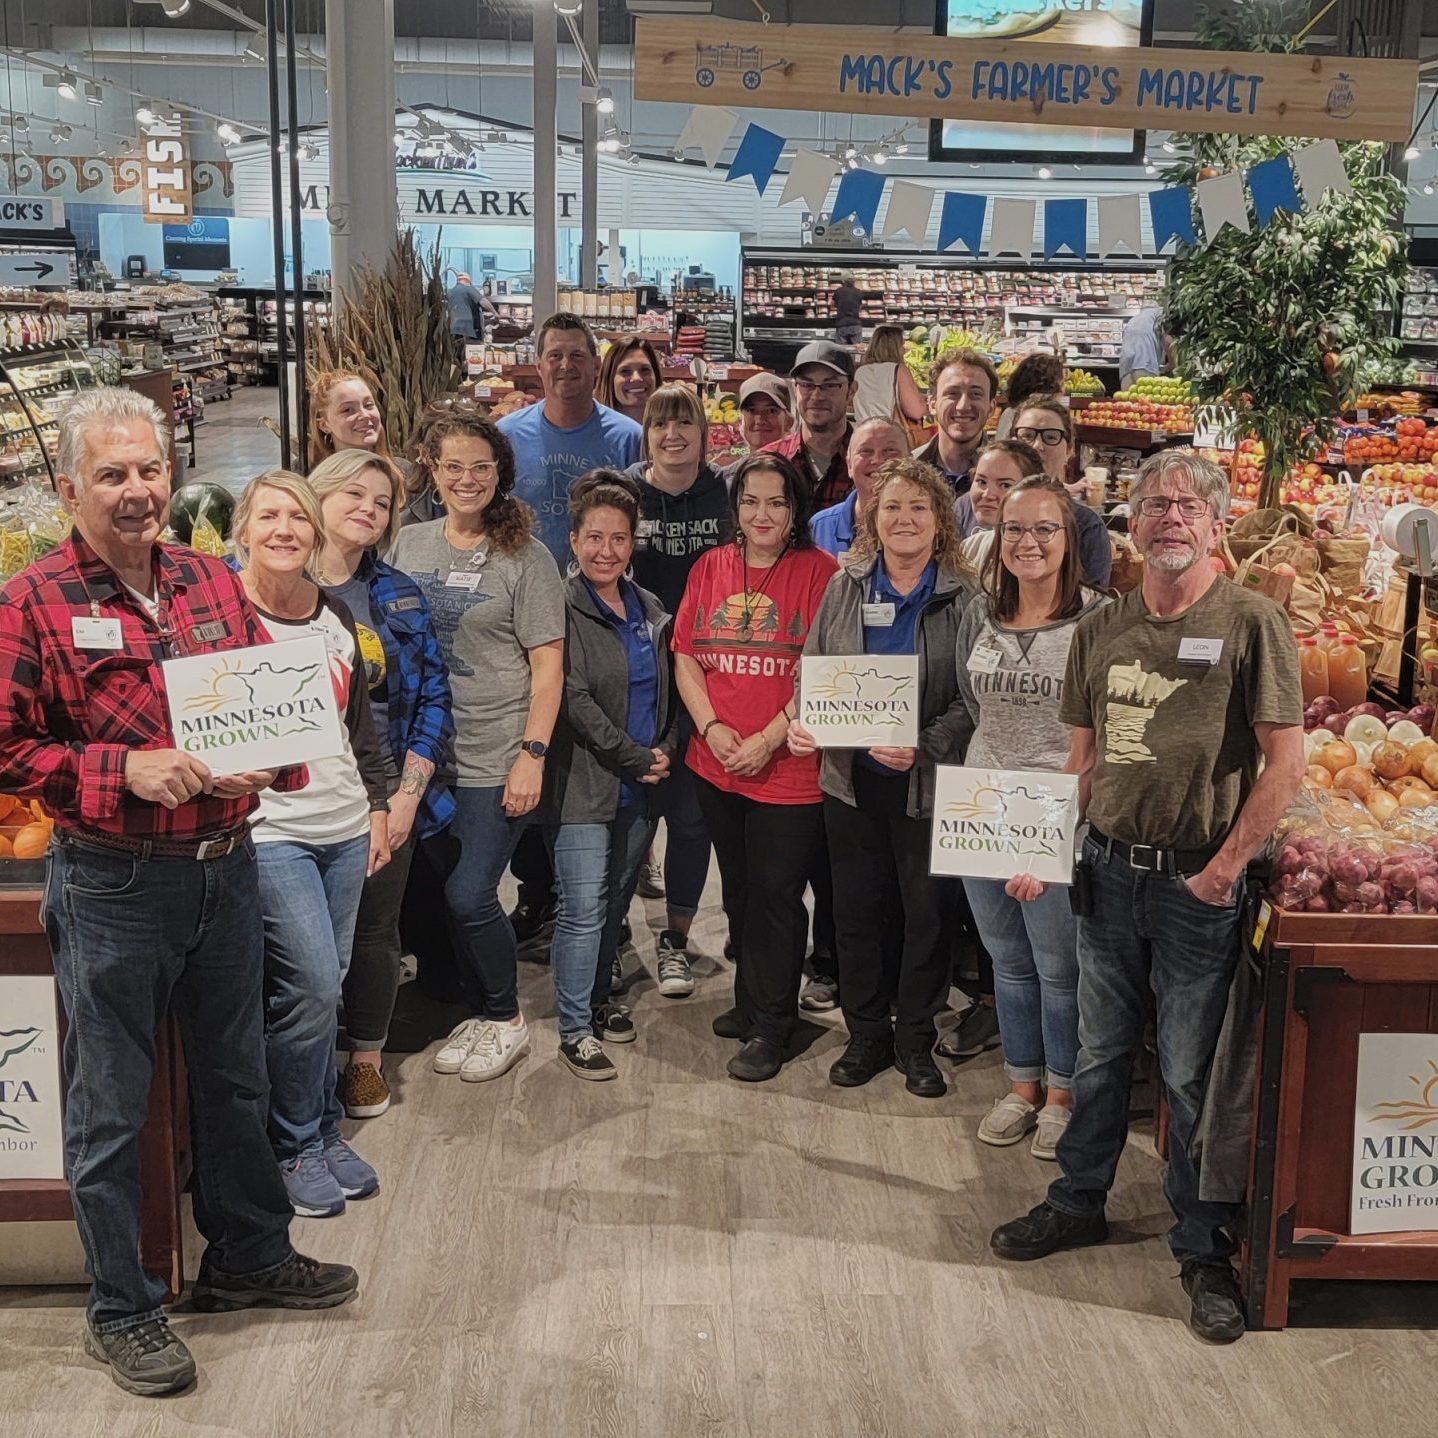 A group of grocery store staff gathered in their produce display. Many of them hold Minnesota Grown signs.